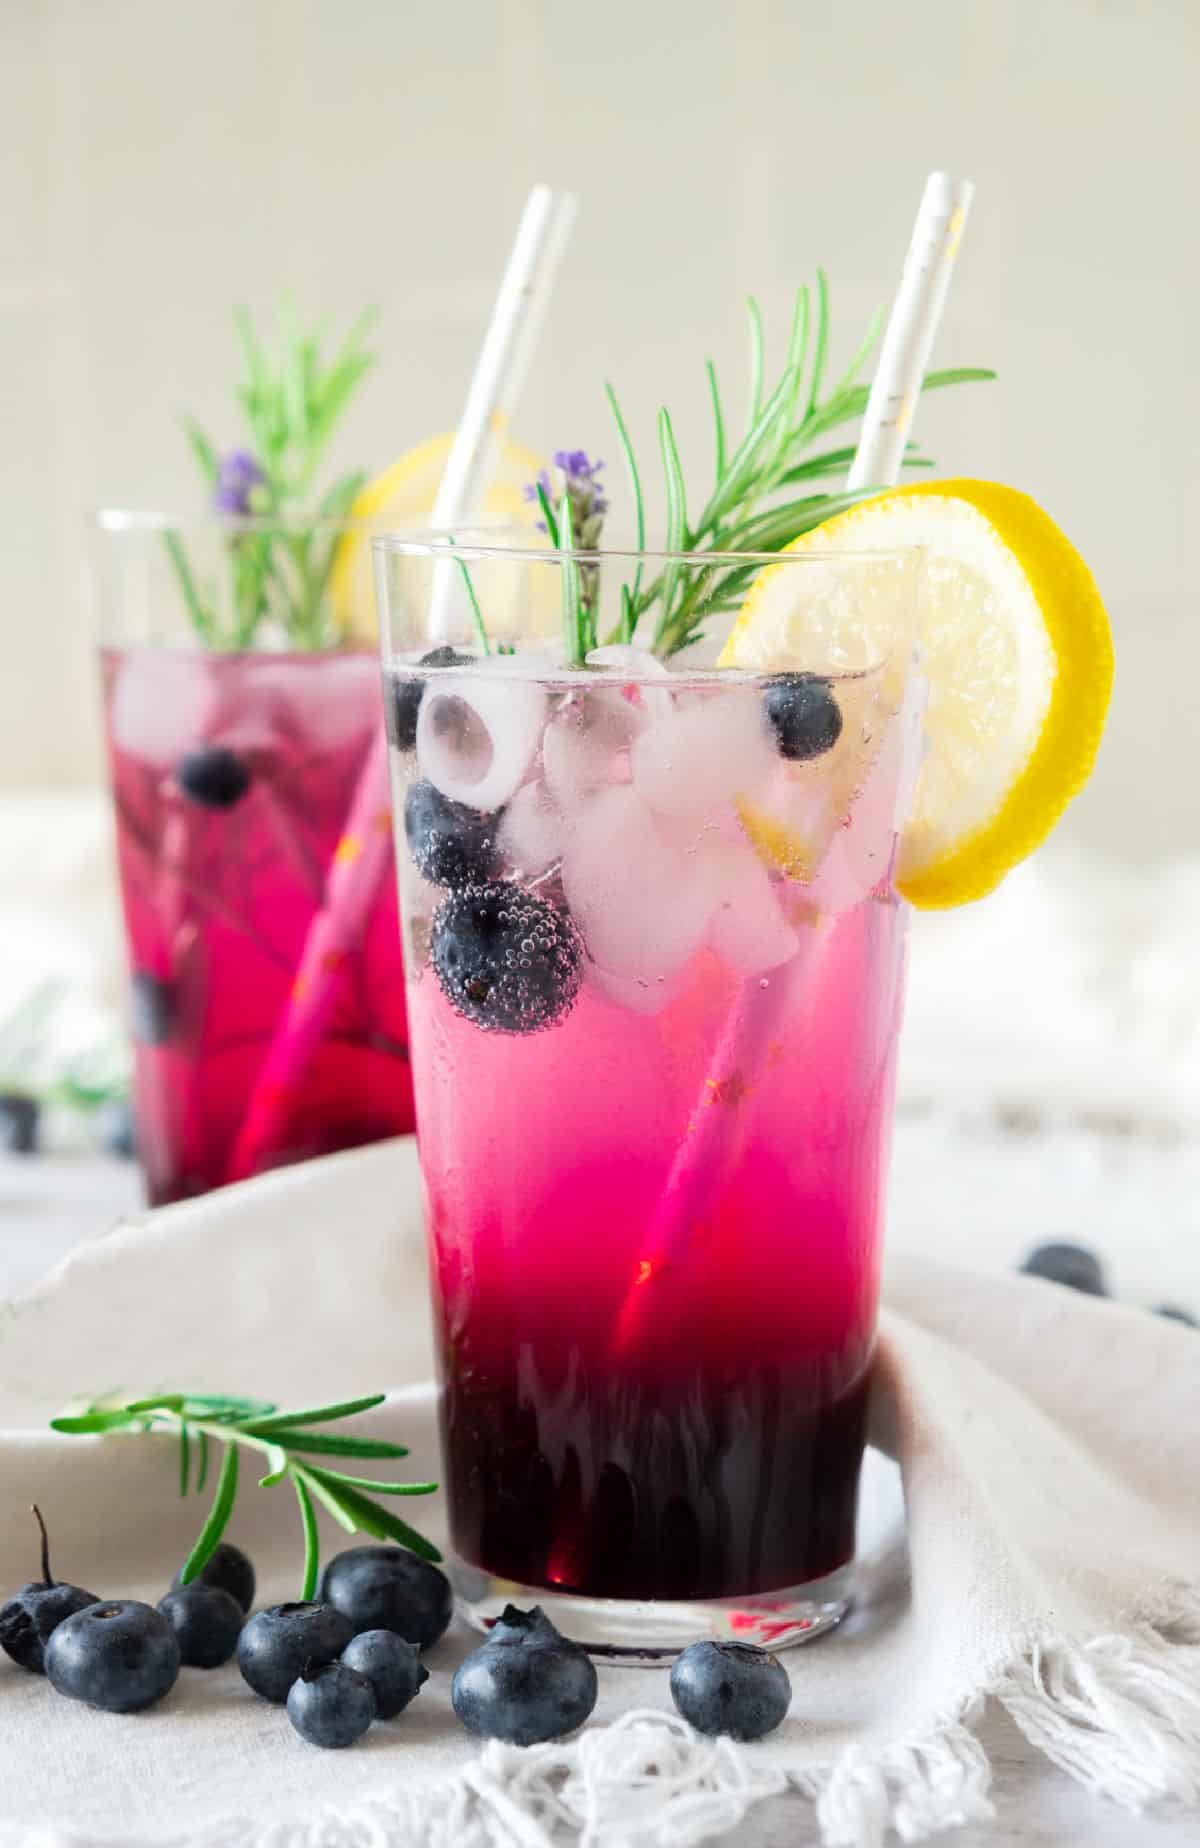 Glasses with blueberry lemonade with lemon slices and rosemary sprigs. White surface, beige background.